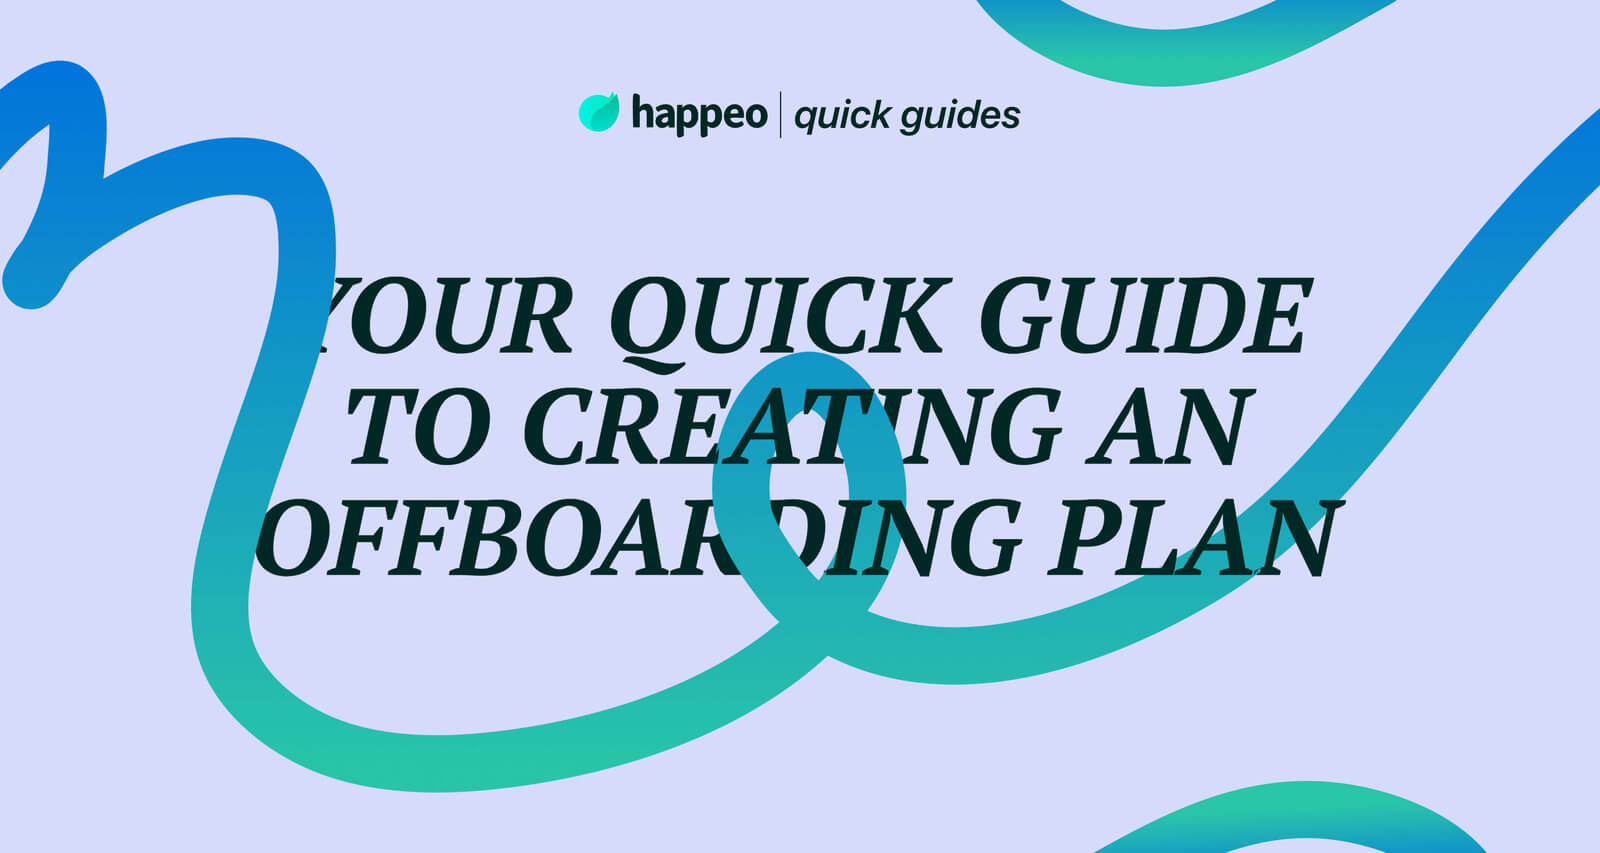 Your quick guide to creating an offboarding plan [incl. template]